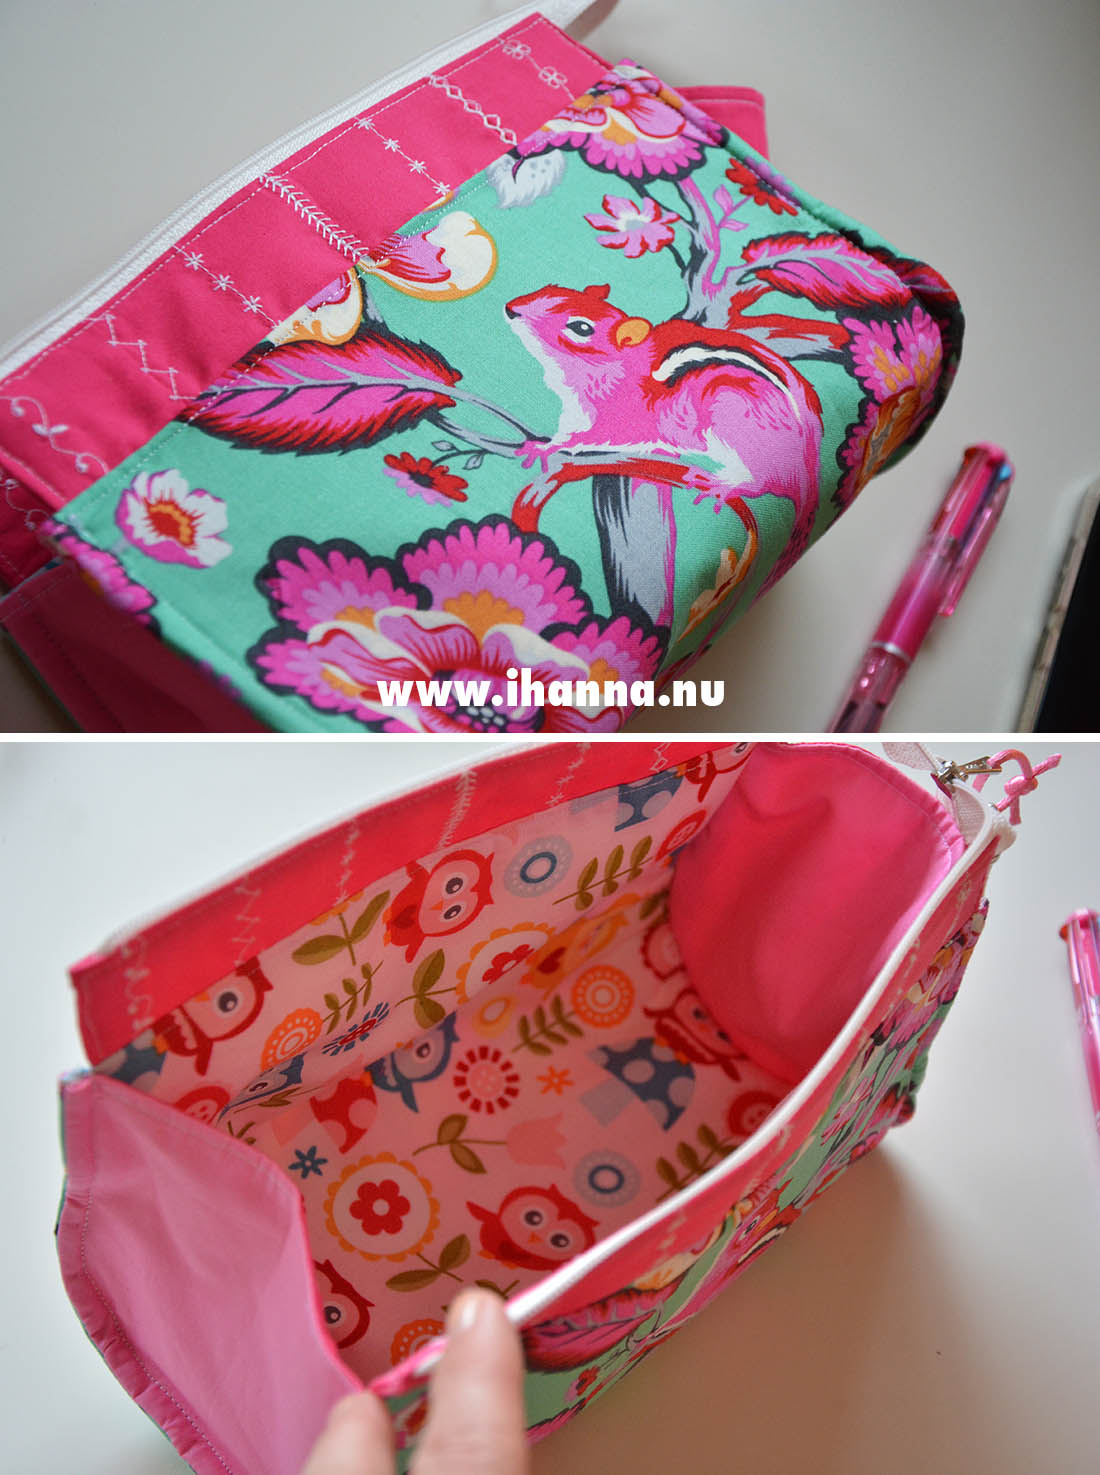 Squirrel pouch outside and owl fabric on the inside - photo copyright Hanna Andersson